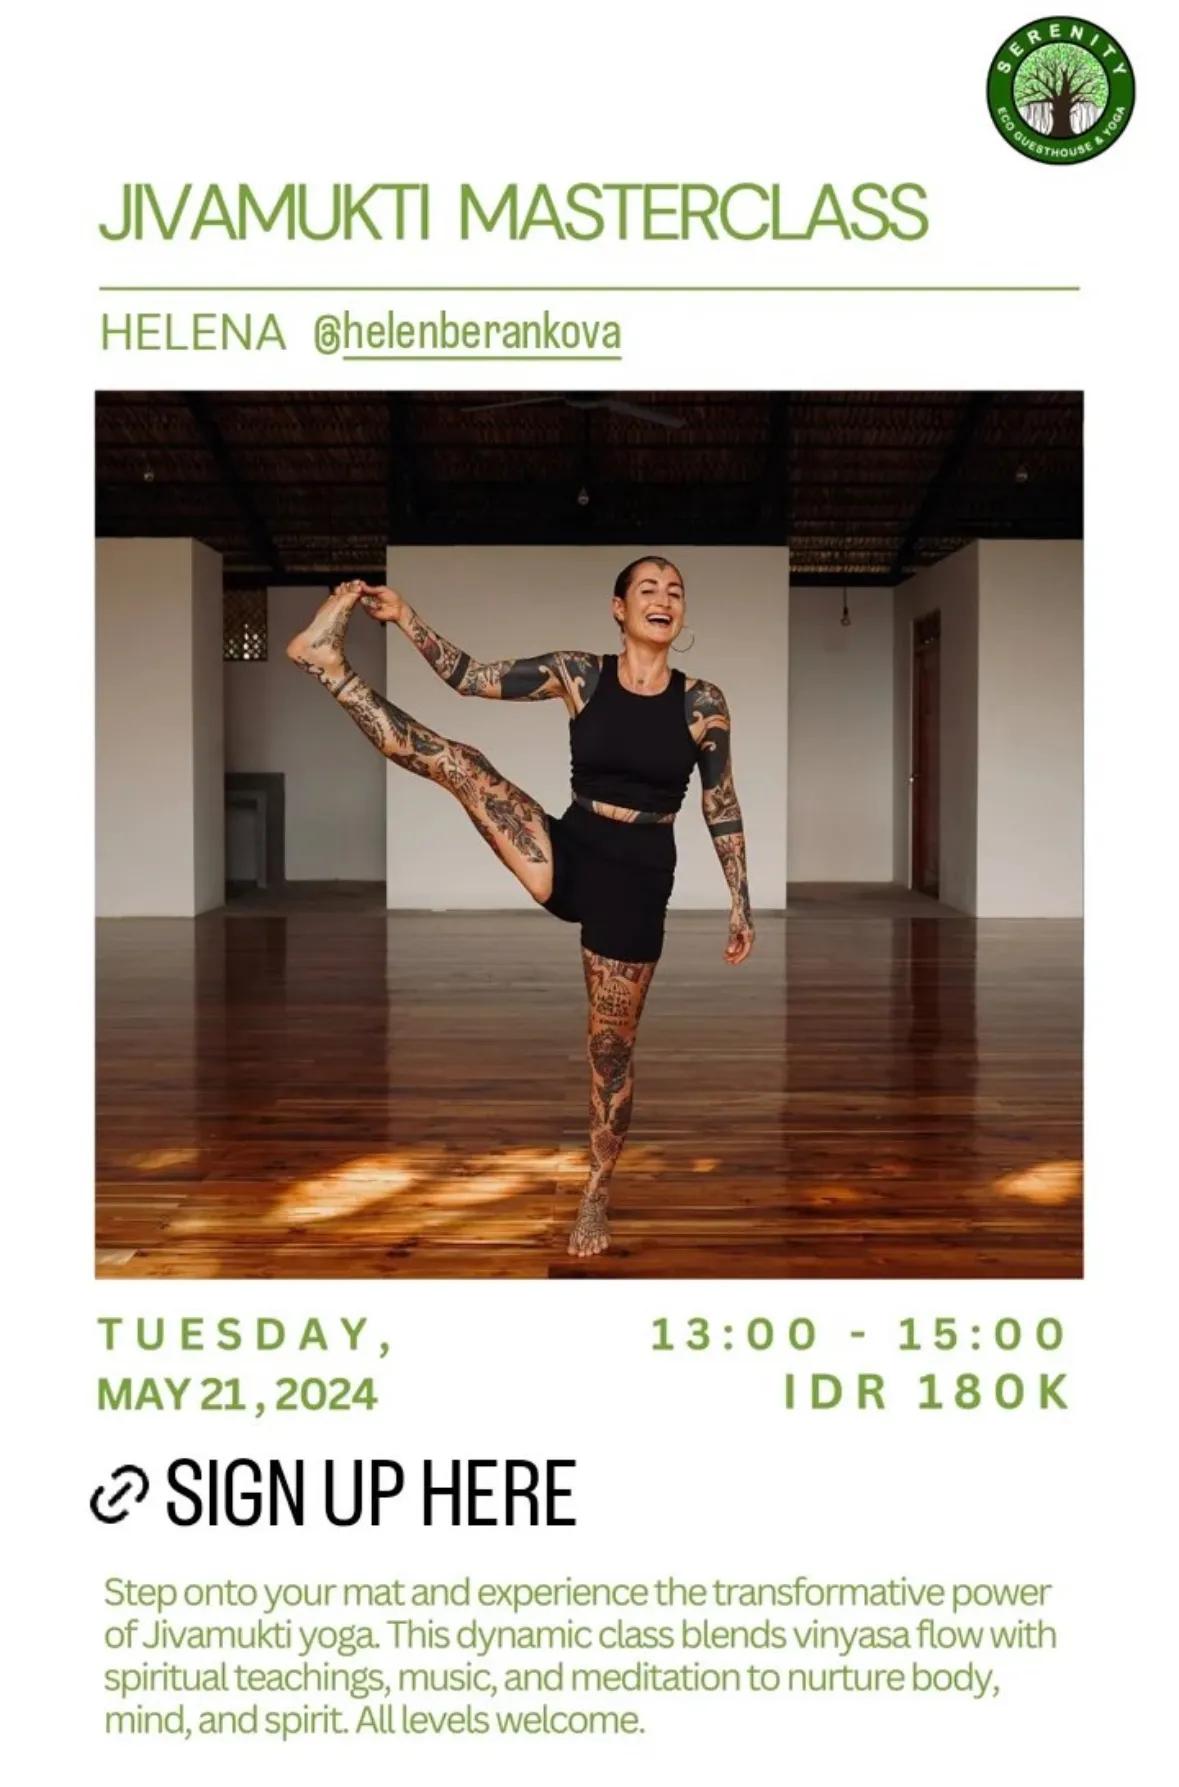 Event at Serenity Eco Guesthouse and Yoga on May 21 2024: Jivamukti Masterclass with Helena